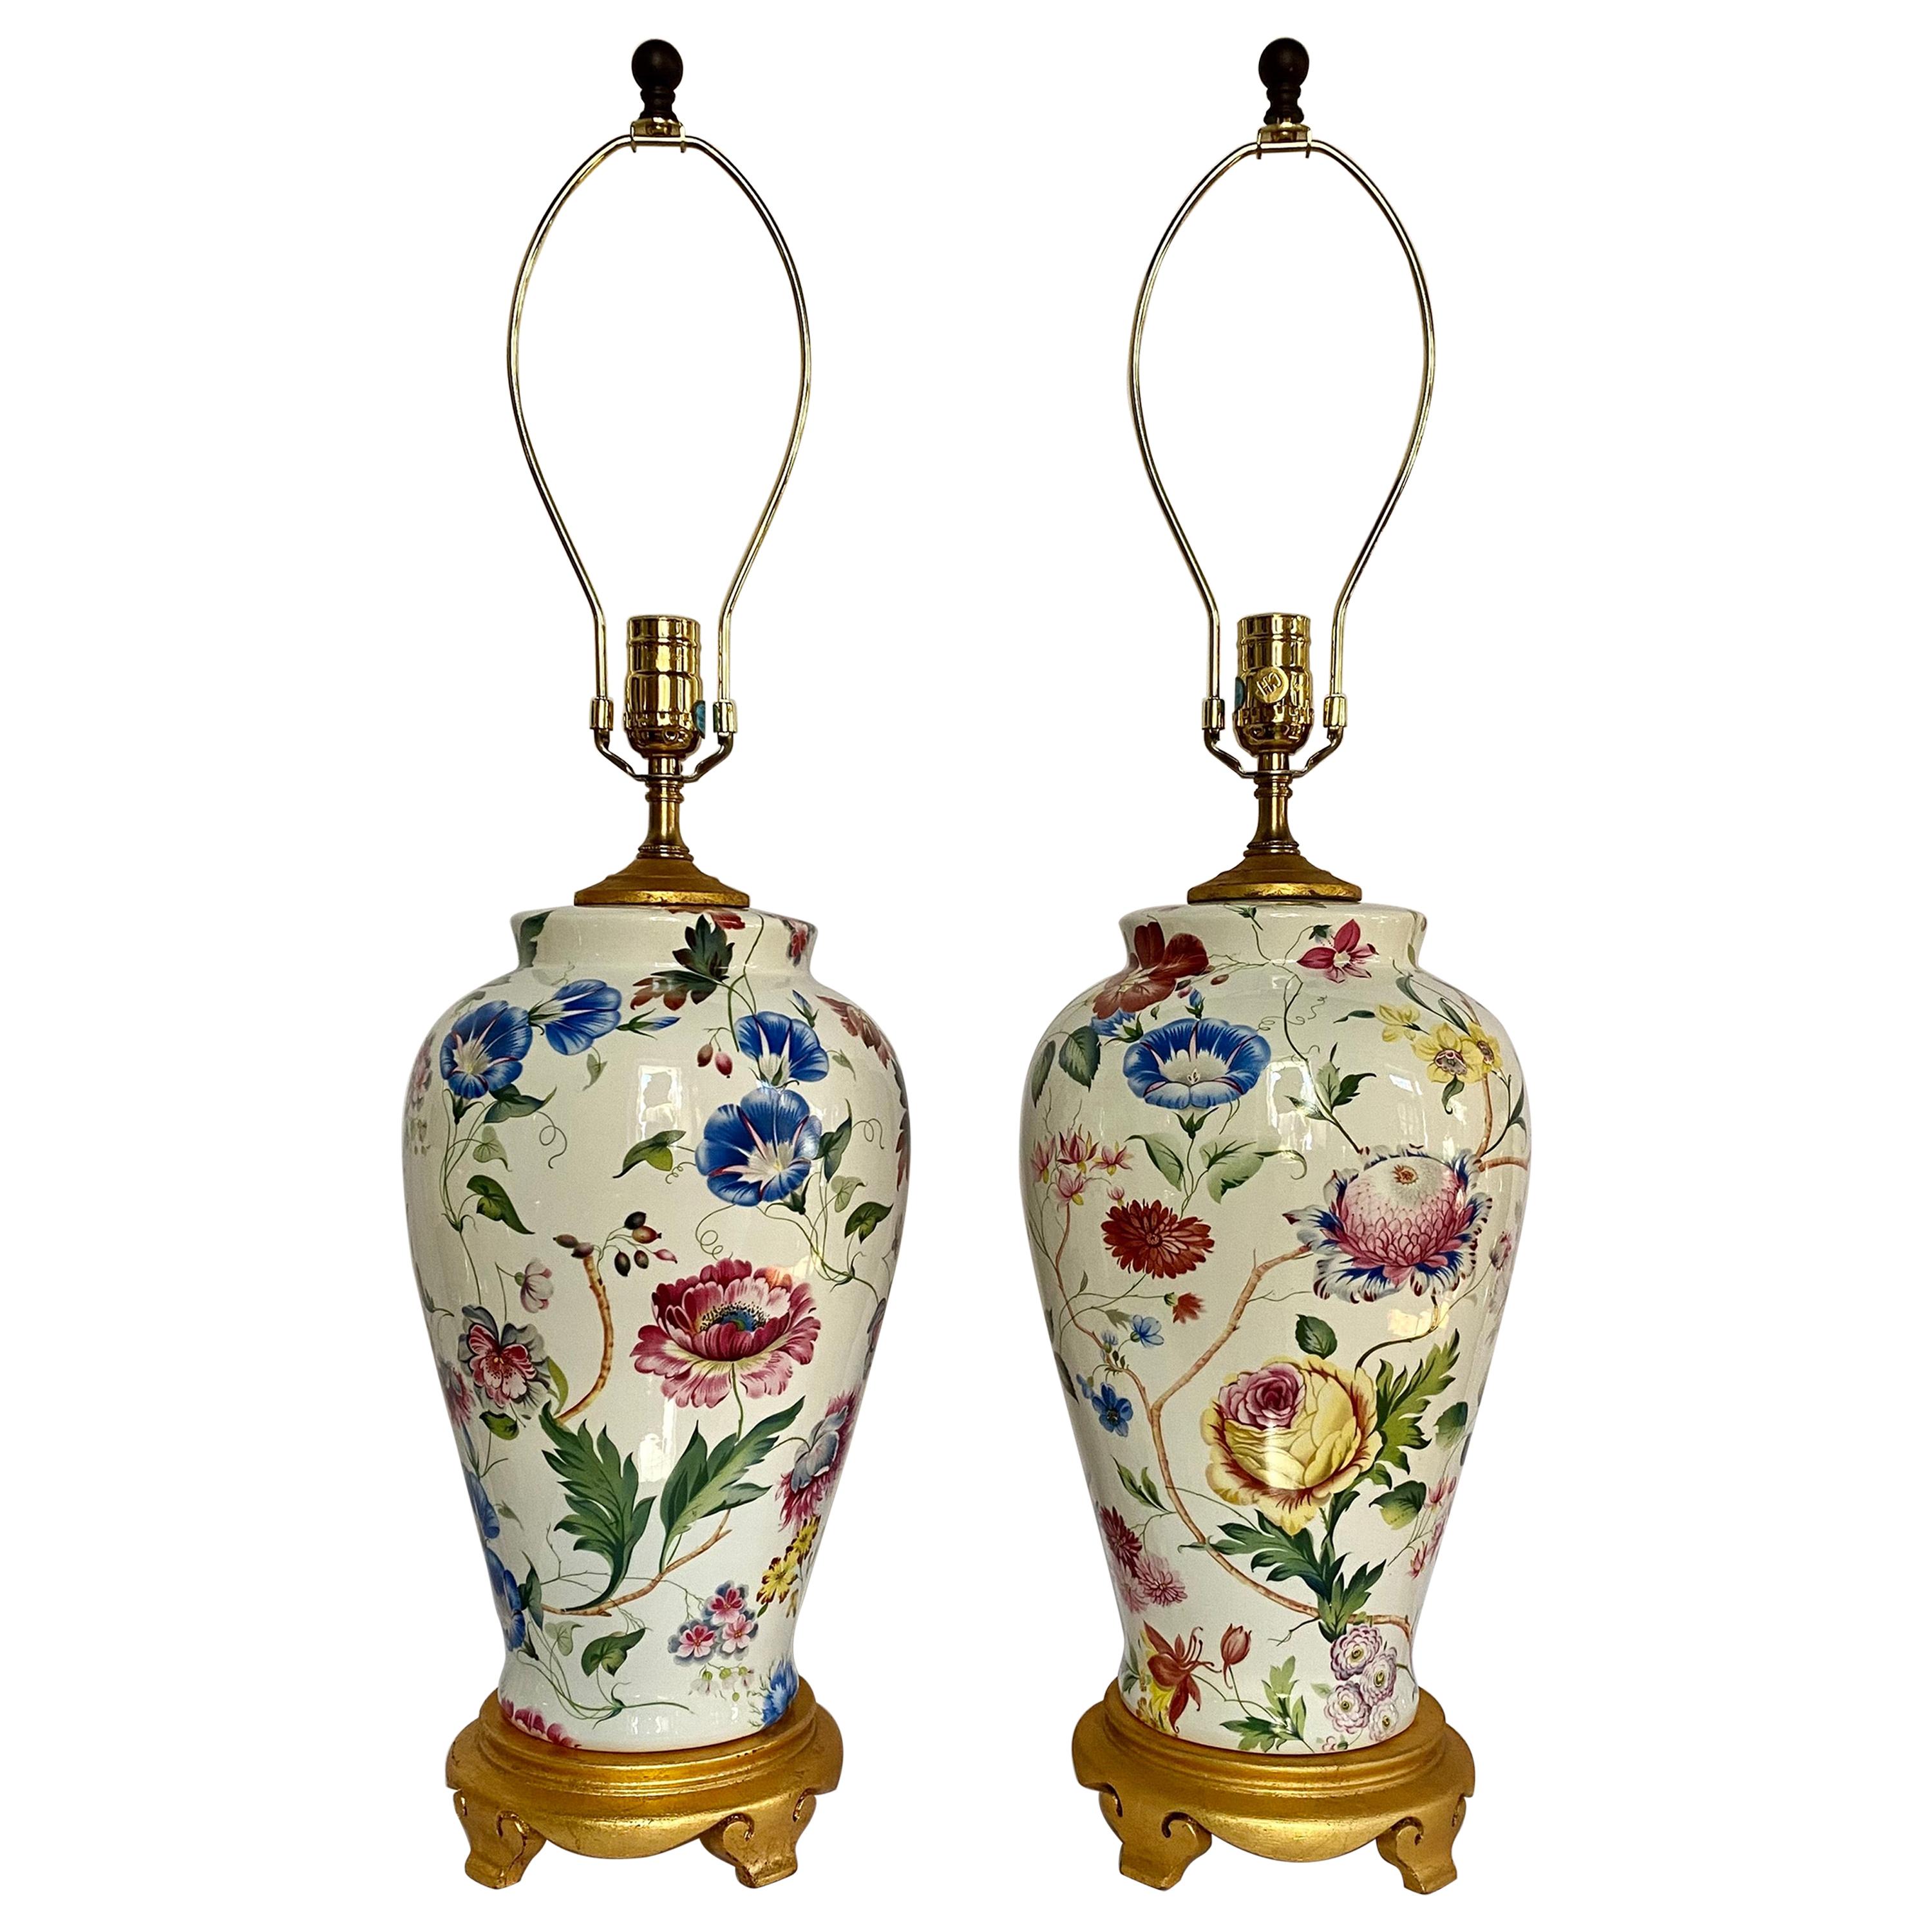 Porcelain Botanical Floral and Gilt Urn Vase Table Lamps by Chelsea House, Pair